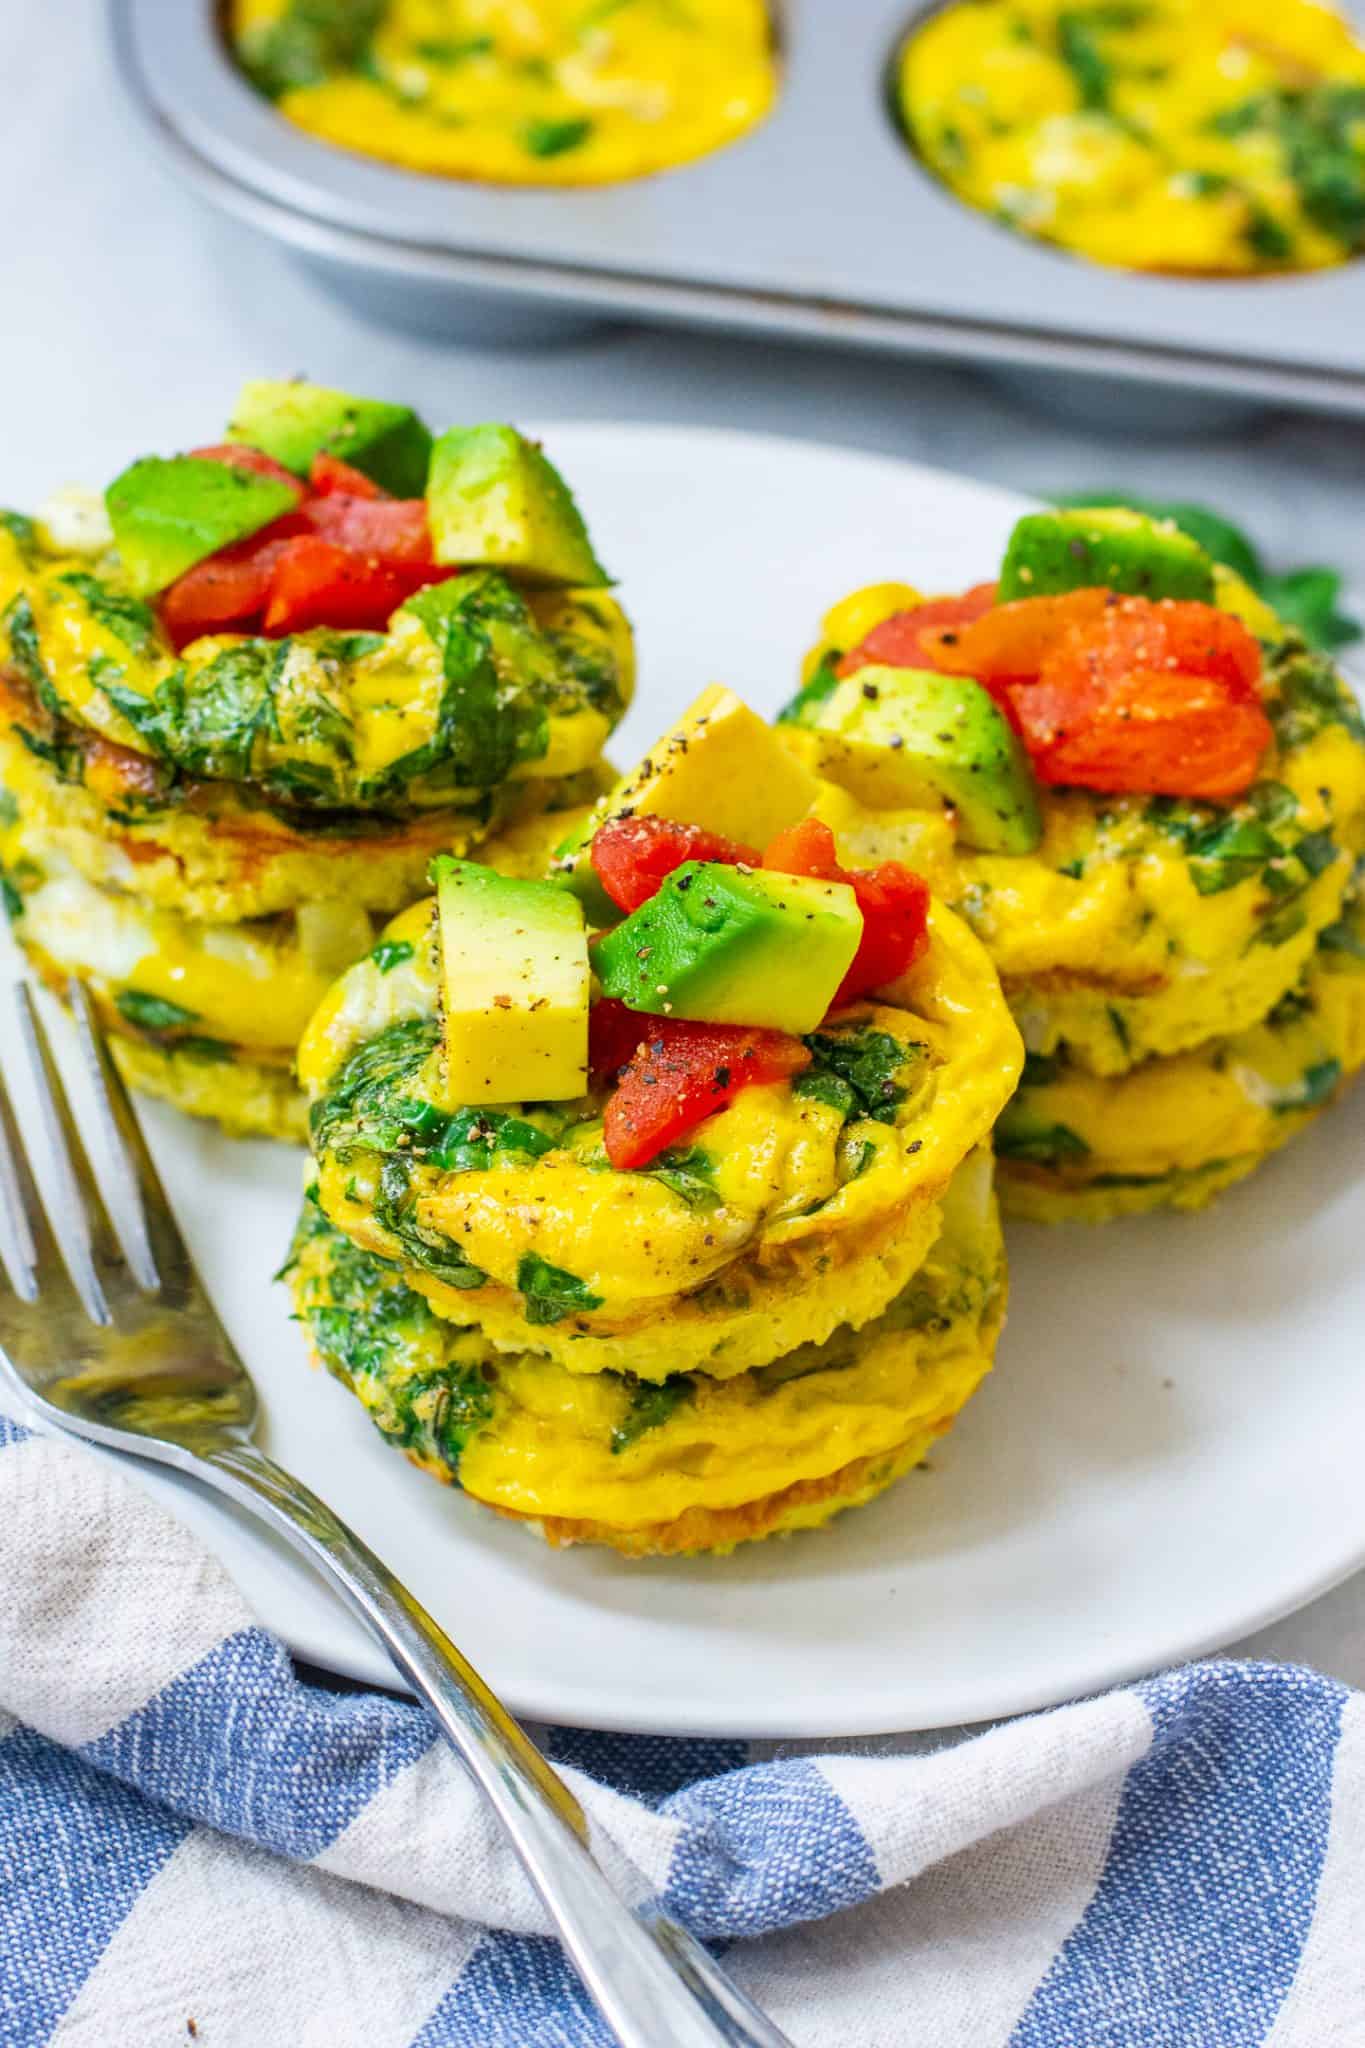 egg muffins topped with tomatoes and avocados